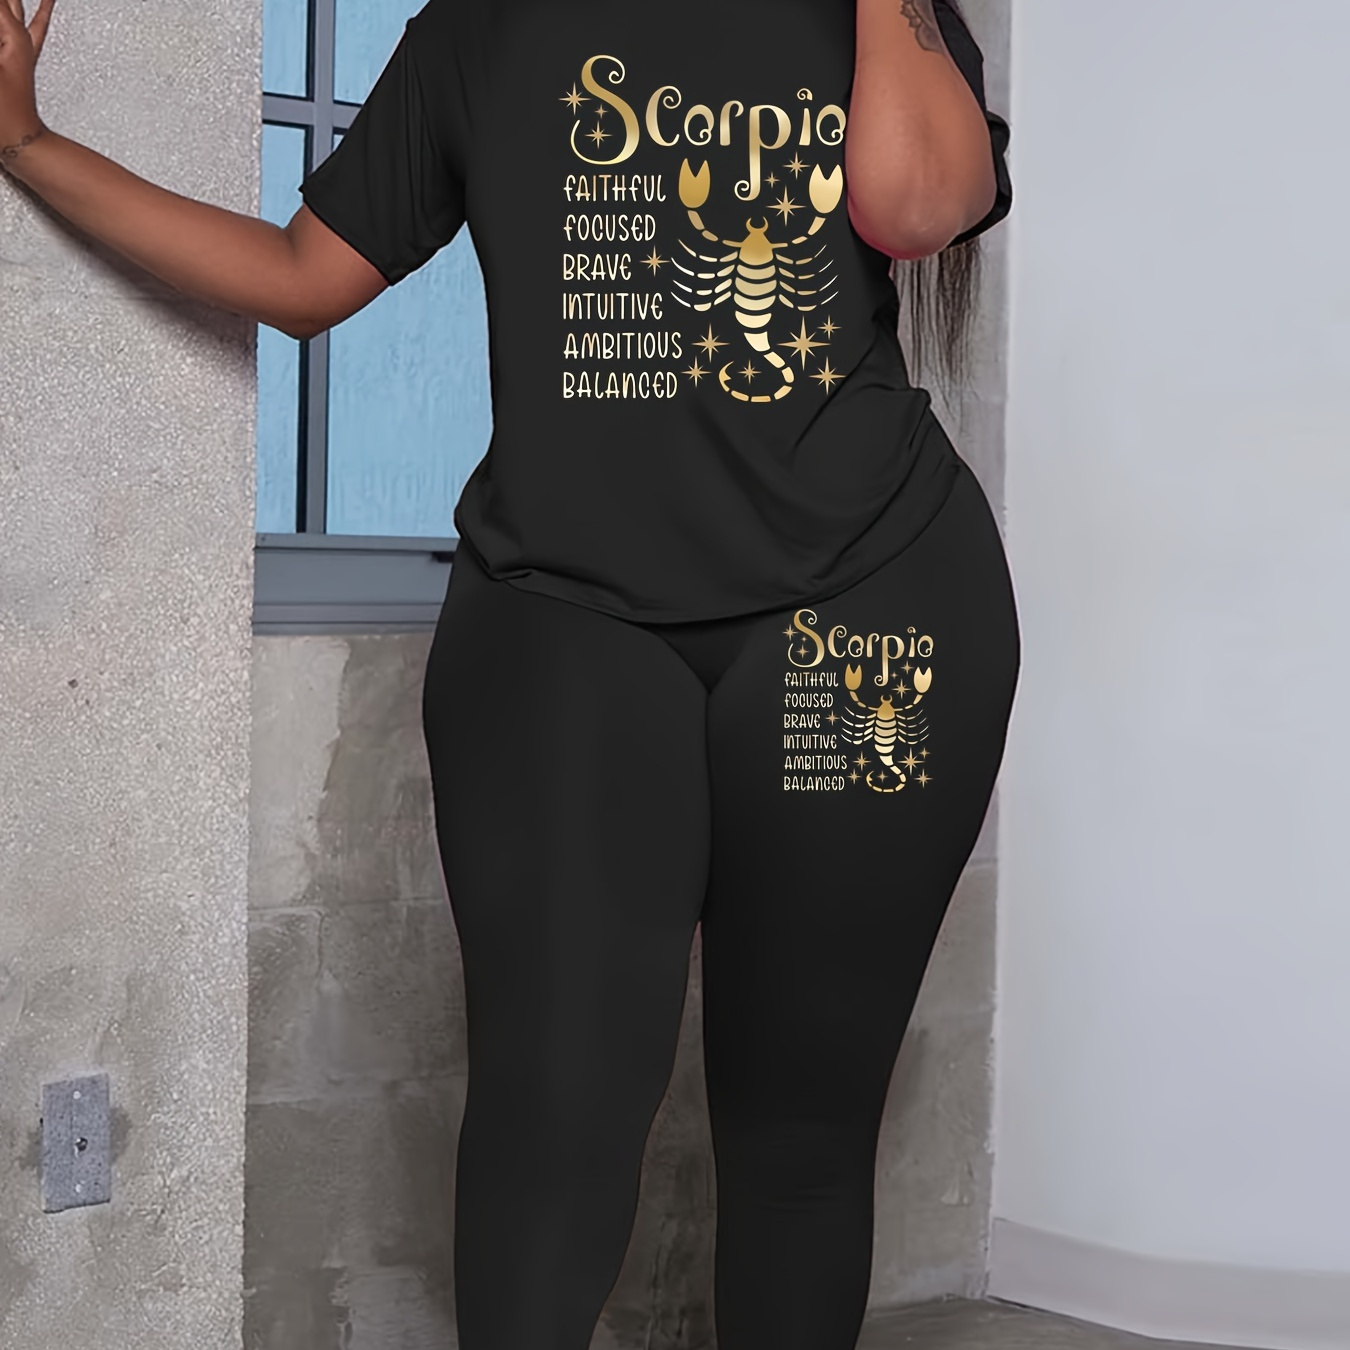 

Scorpio & Letter Print Two-piece Set, Casual Short Sleeve T-shirt & Skinny Pants Outfits, Women's Clothing